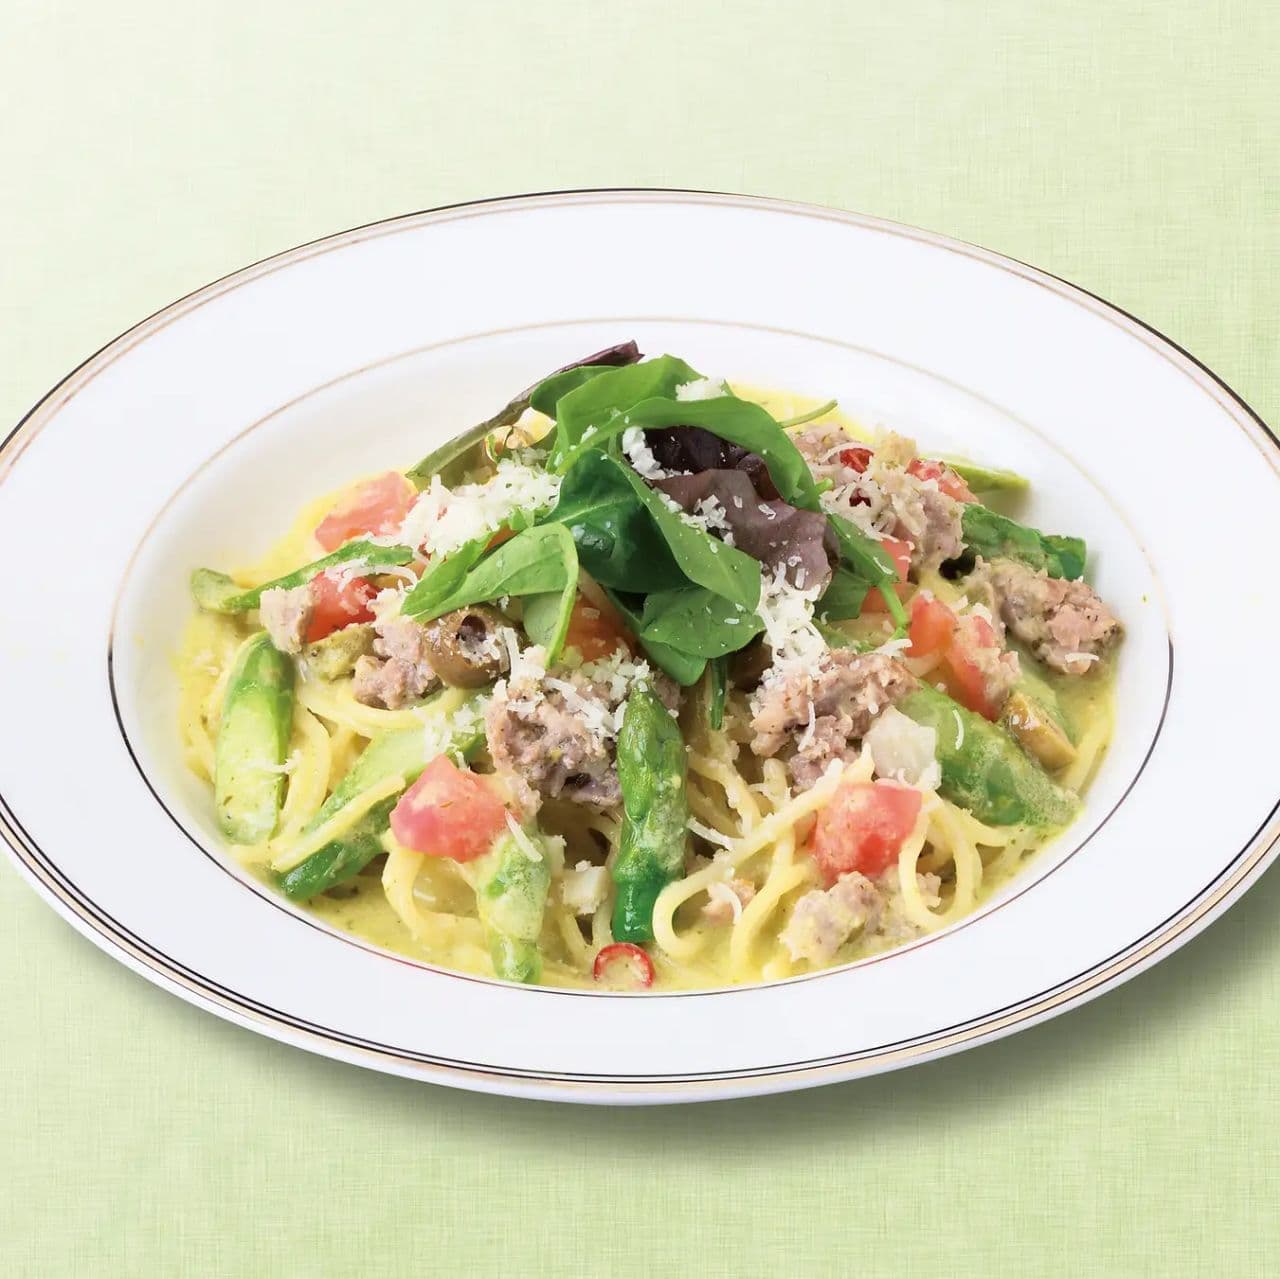 Ginza Kozy Corner "Pasta with Parsley Butter-Scented Spring Vegetables and Coarsely Ground Pork